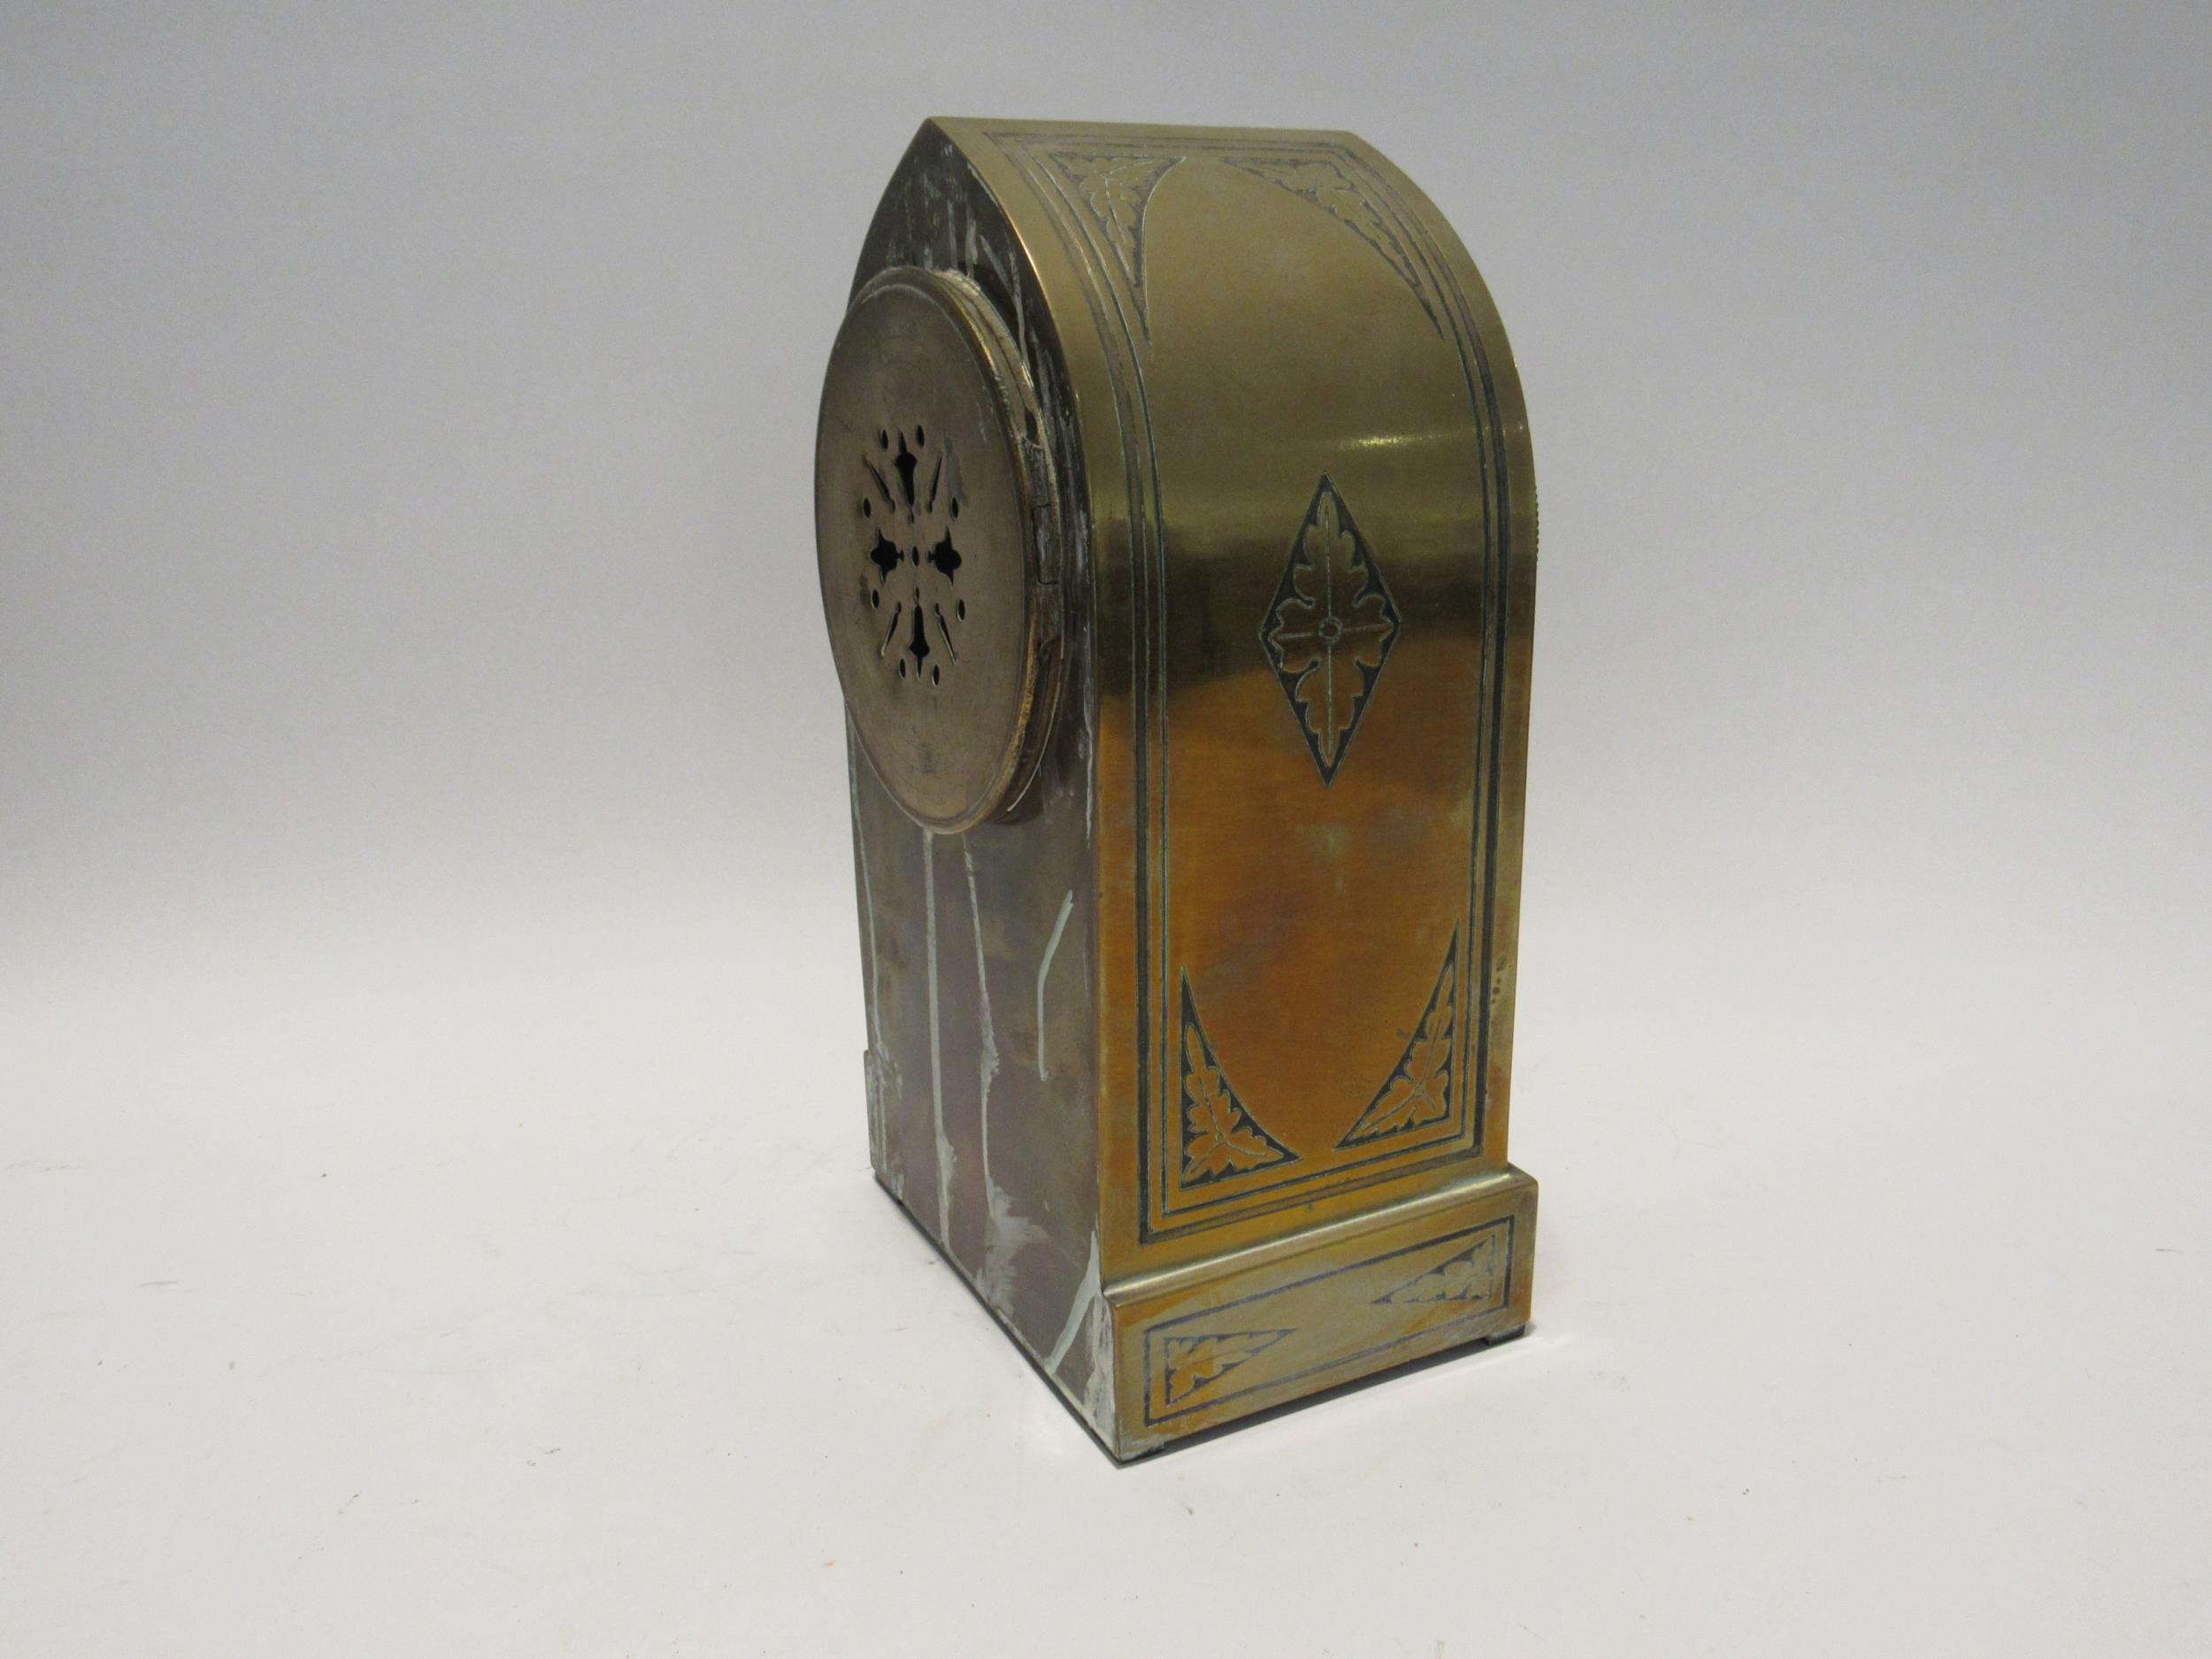 A late 19th Century French Arch form mantel clock, 27cm tall x 15cm x 11cm - Image 2 of 3